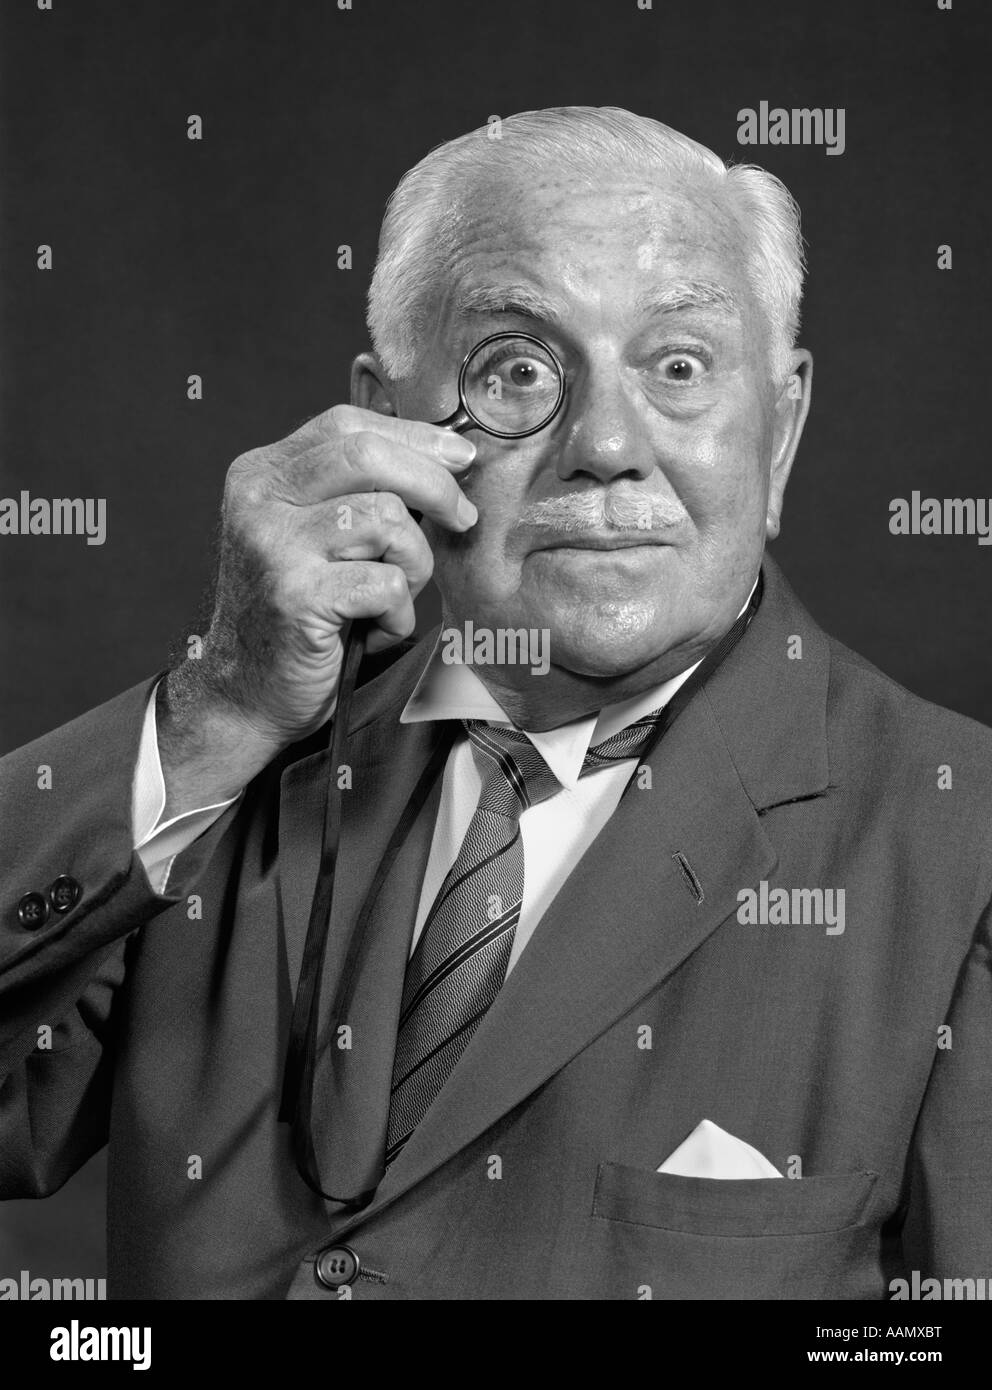 1950s CHARACTER PORTRAIT ELDERLY MAN TIE FORMAL JACKET HOLDING MONOCLE SURPRISED FUNNY FACIAL EXPRESSION Stock Photo